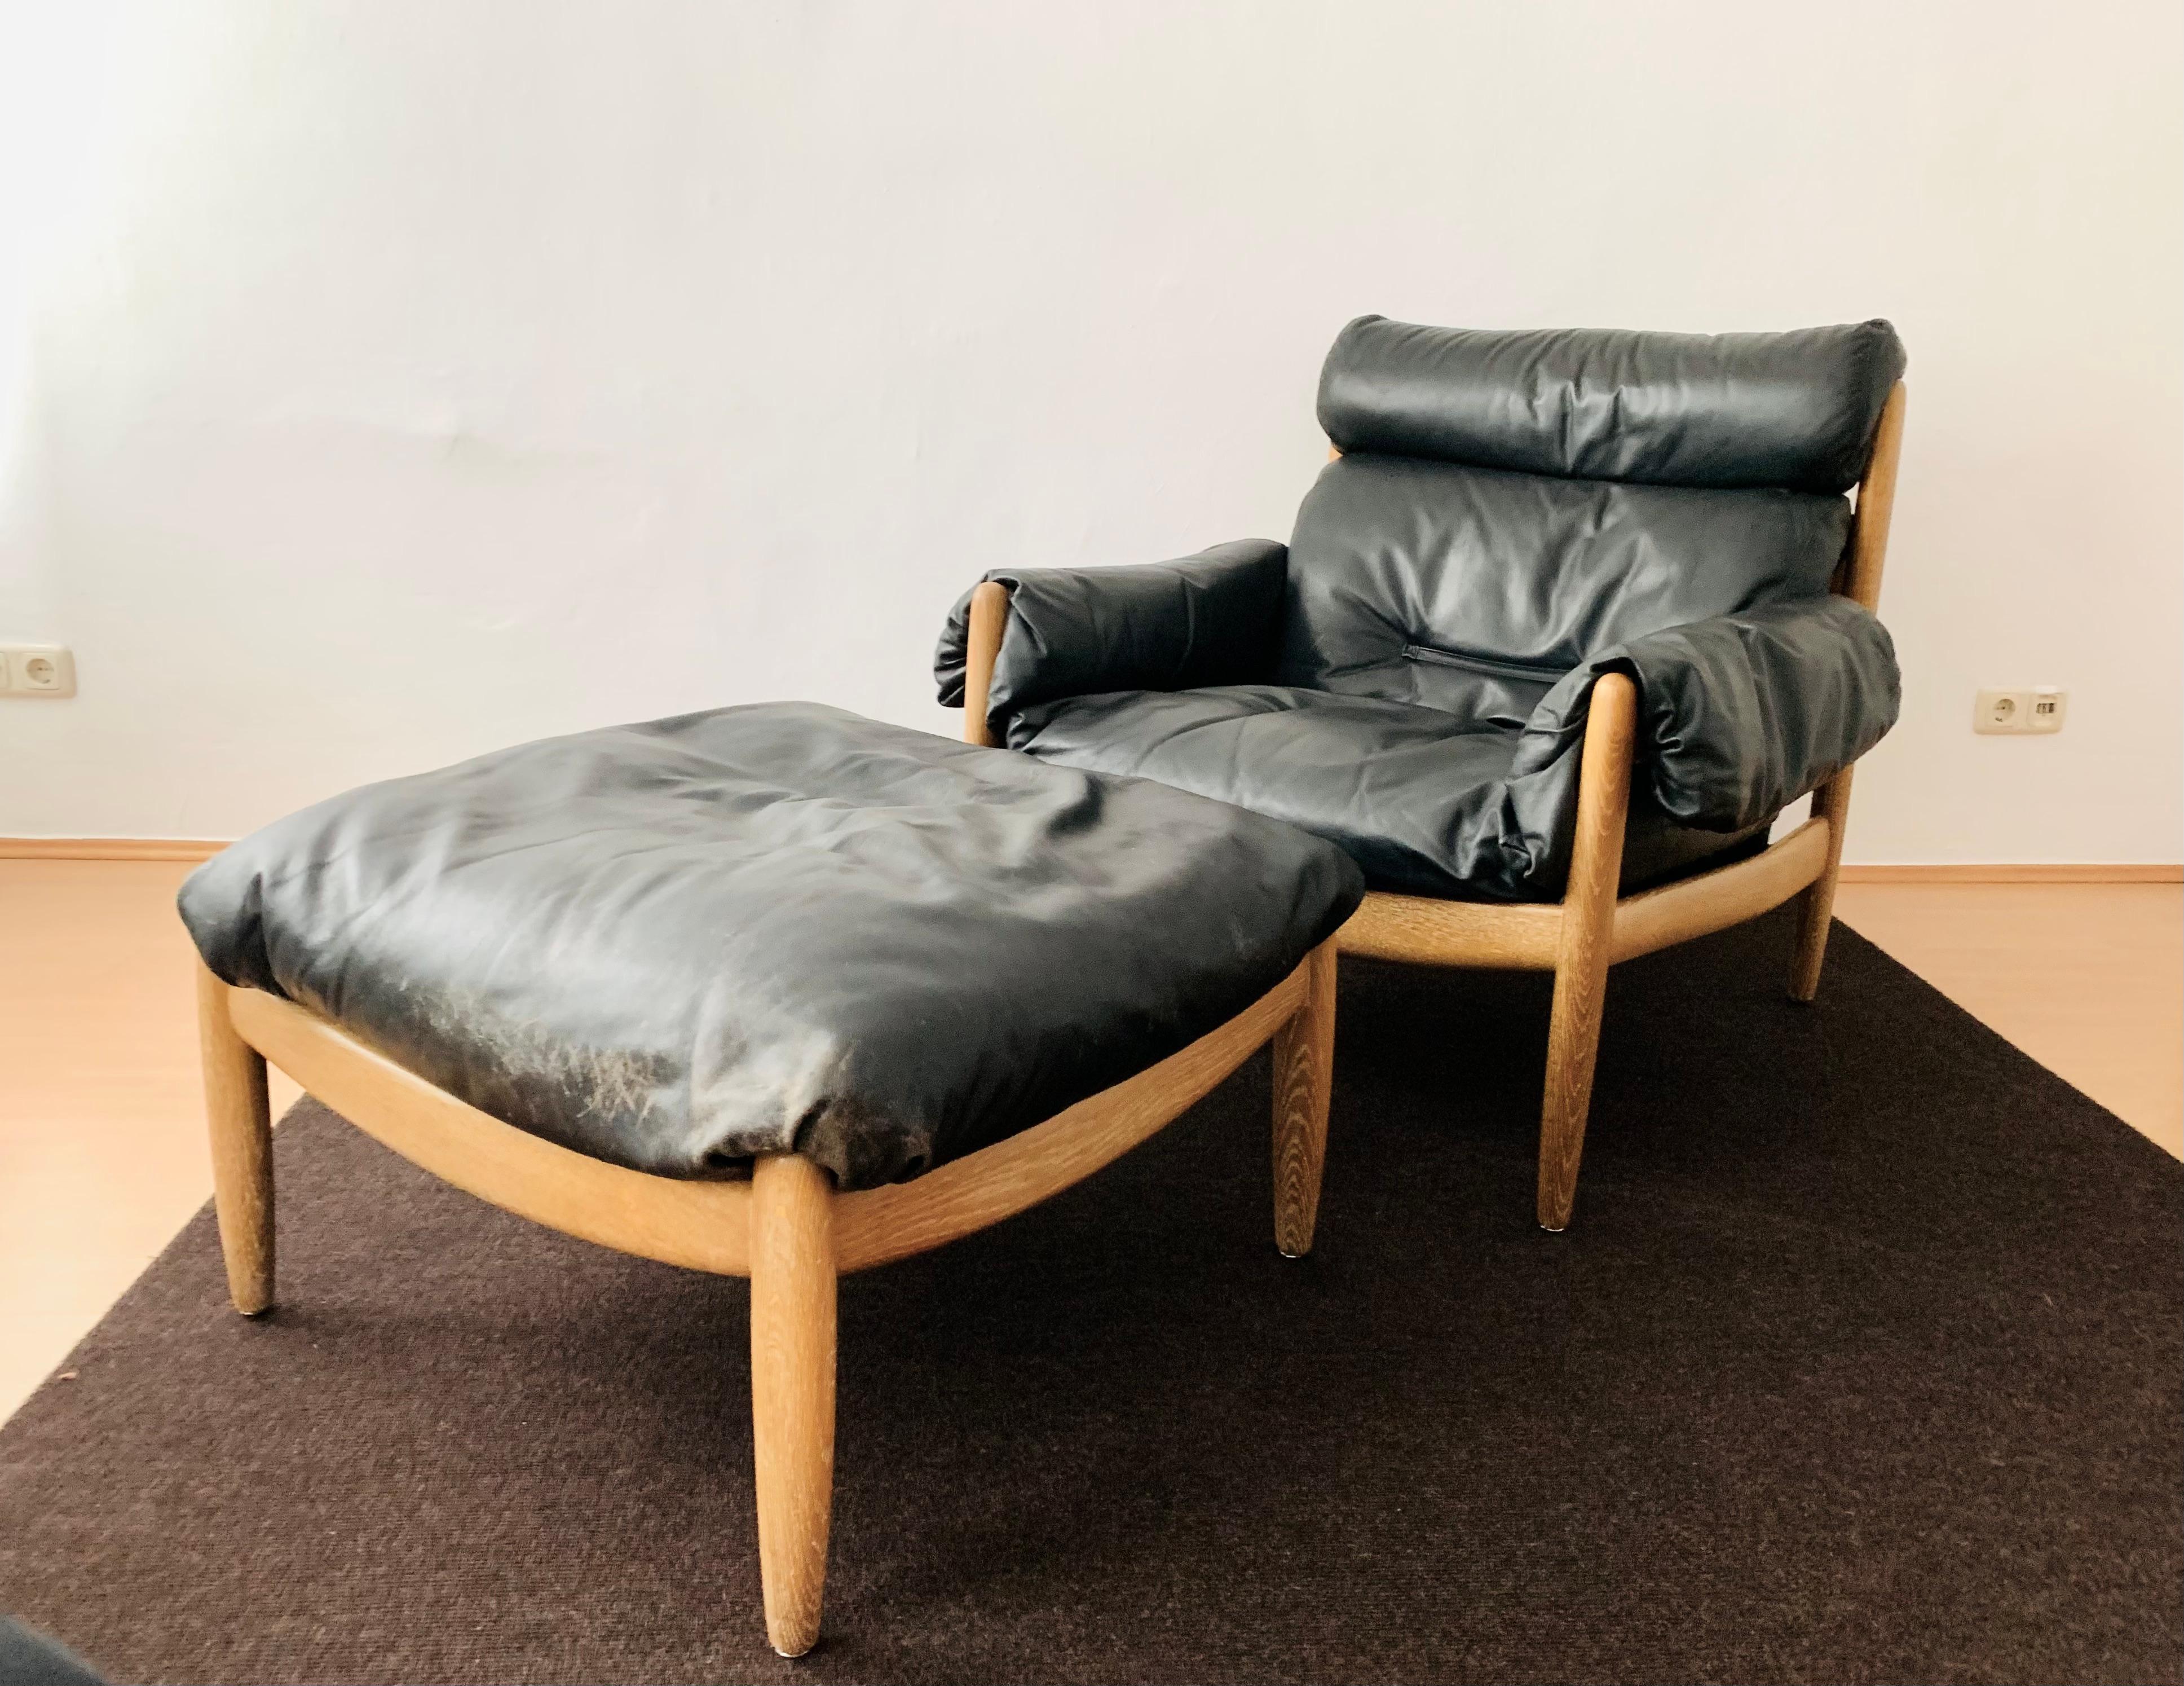 Wonderful and very comfortable Danish leather armchair from the 1960s.
Very nice design and high-quality workmanship.
The robust and very soft leather ensures a very comfortable seating experience.
An enrichment for every home.
The oak frame is